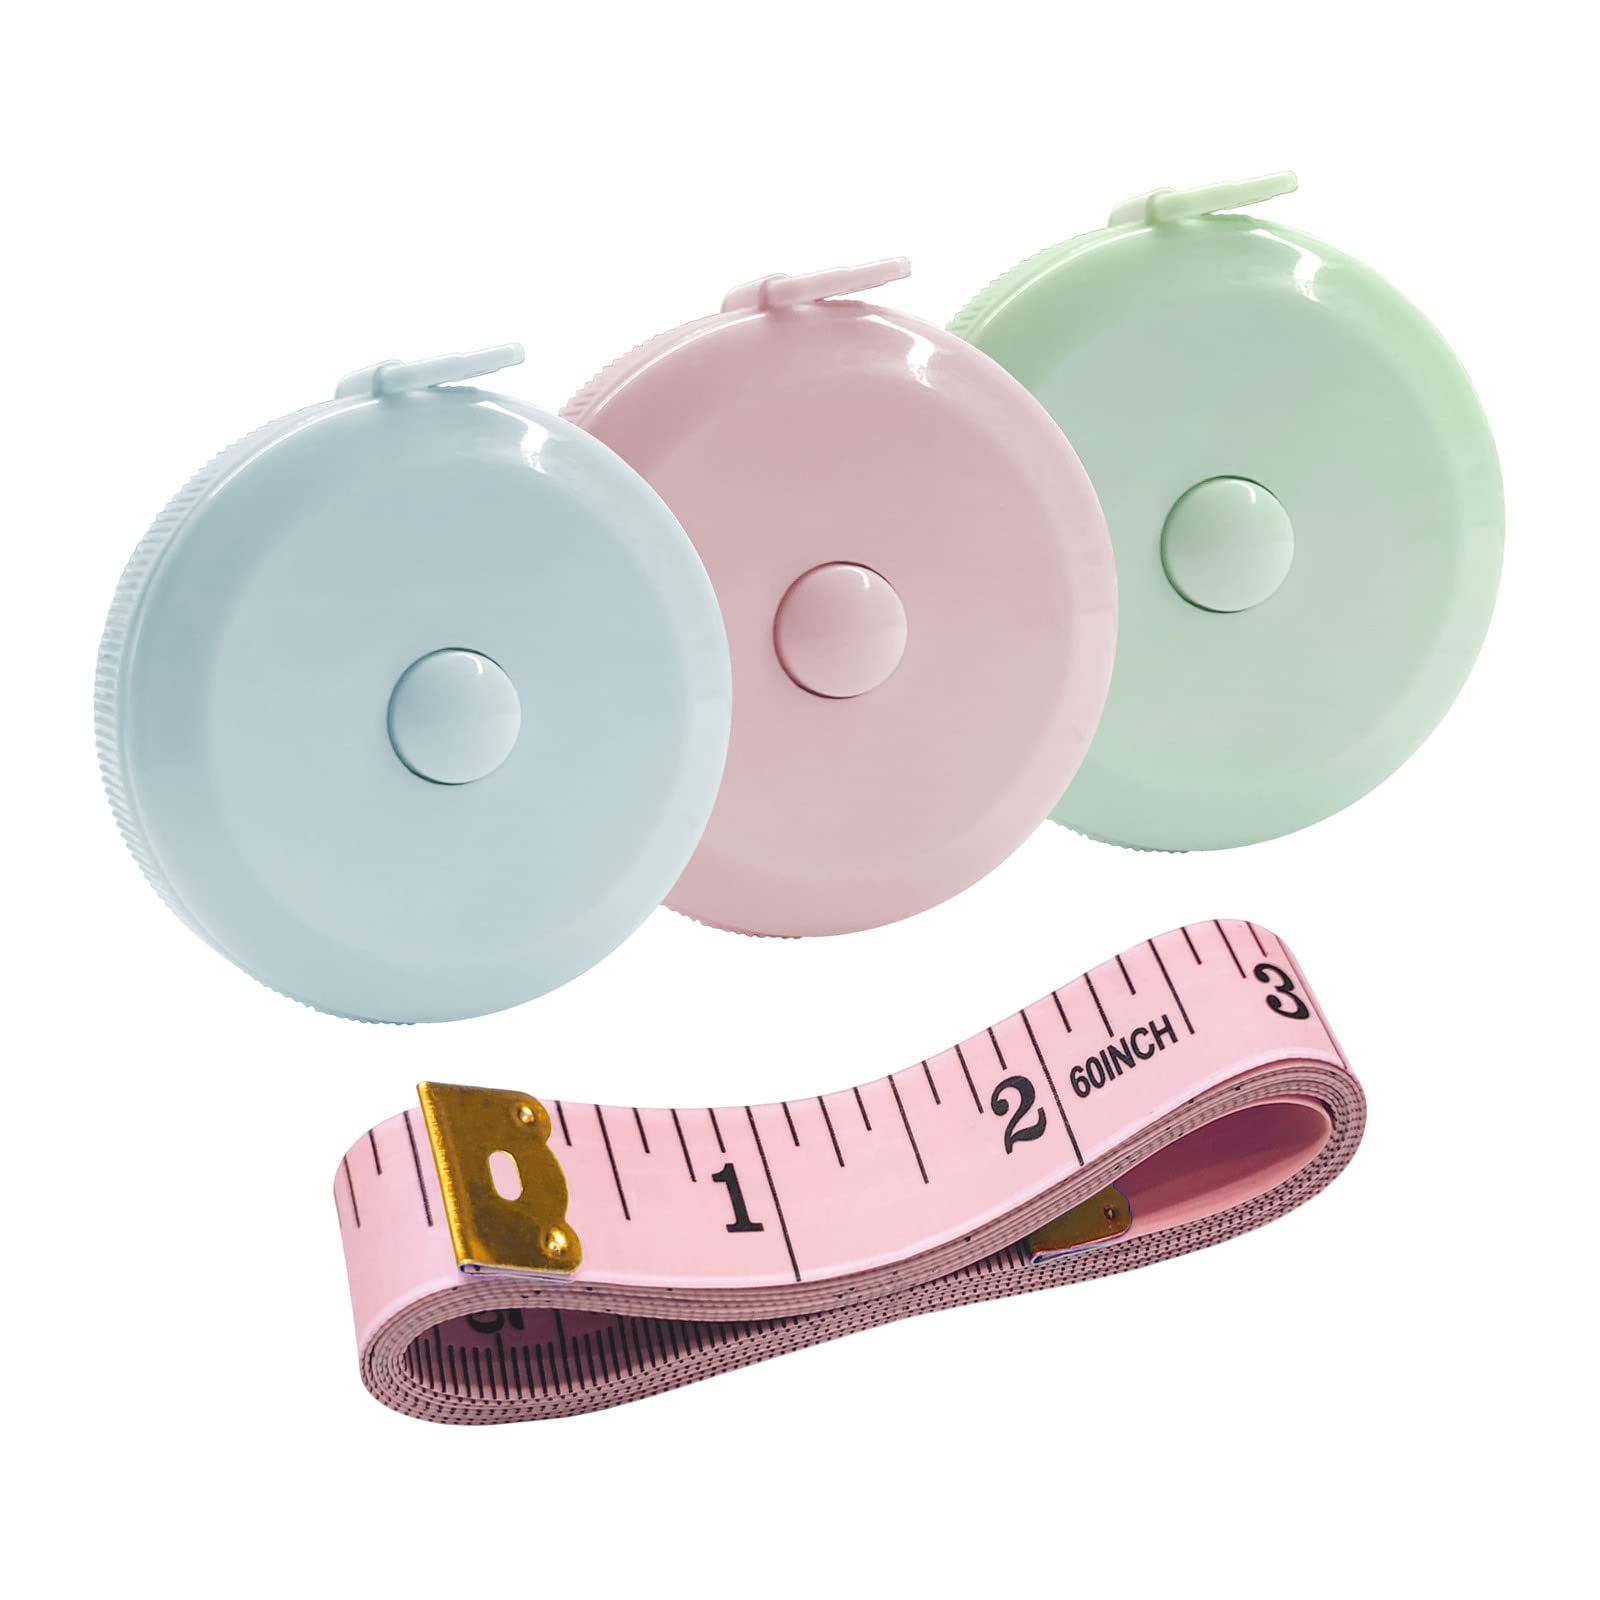 3 PACK: Retractable Medical Body Tape Measure White, Teal, and